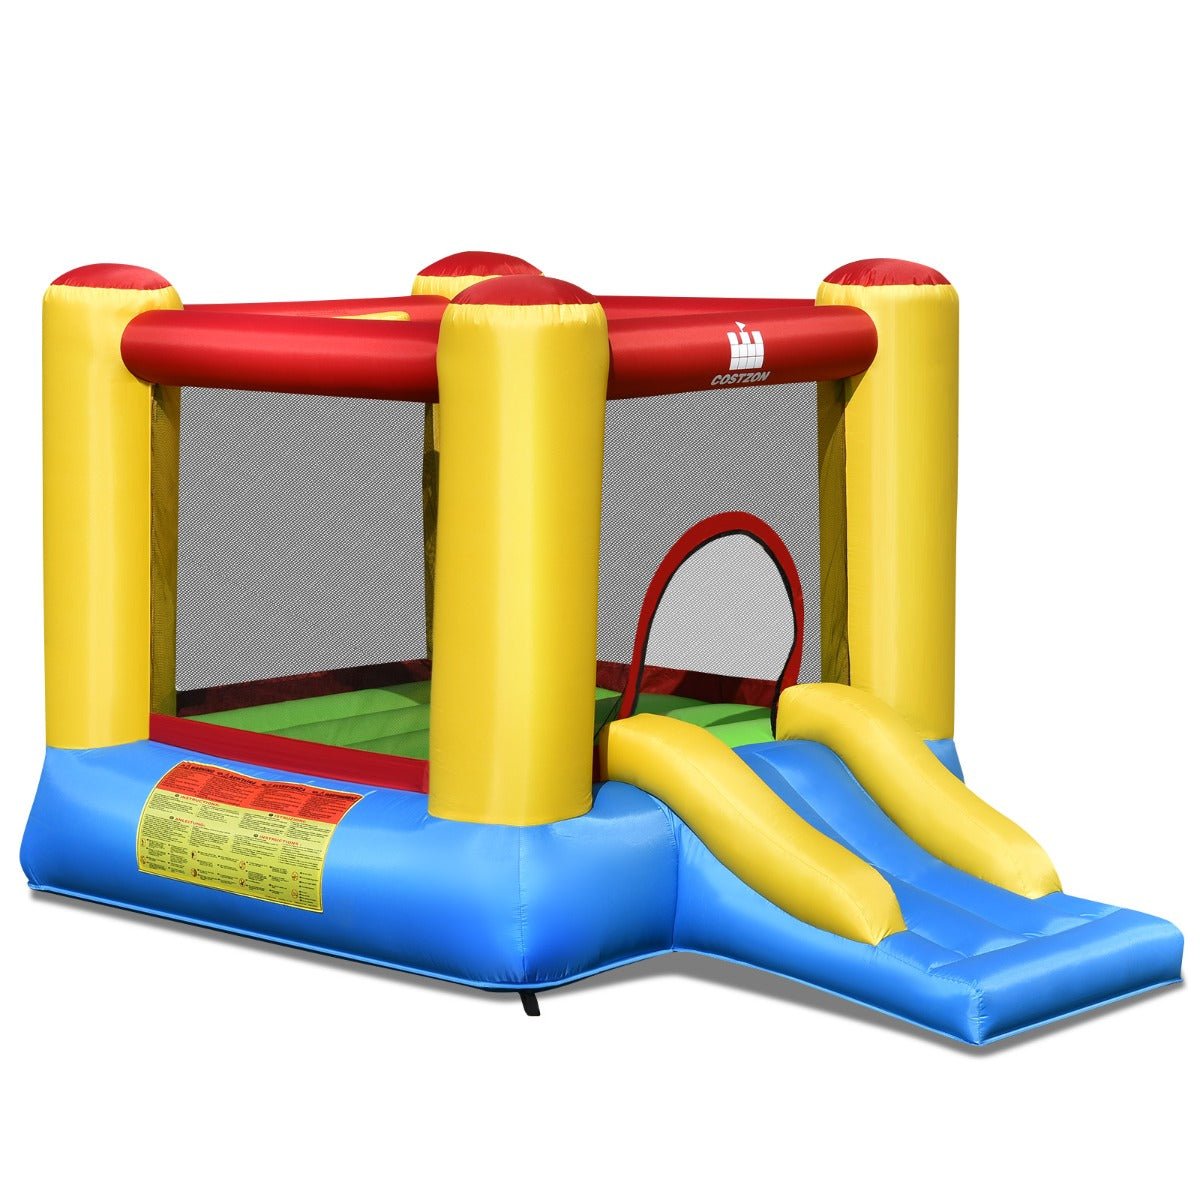 Bouncy House with Slide & Basketball Hoop - Active Play for Children